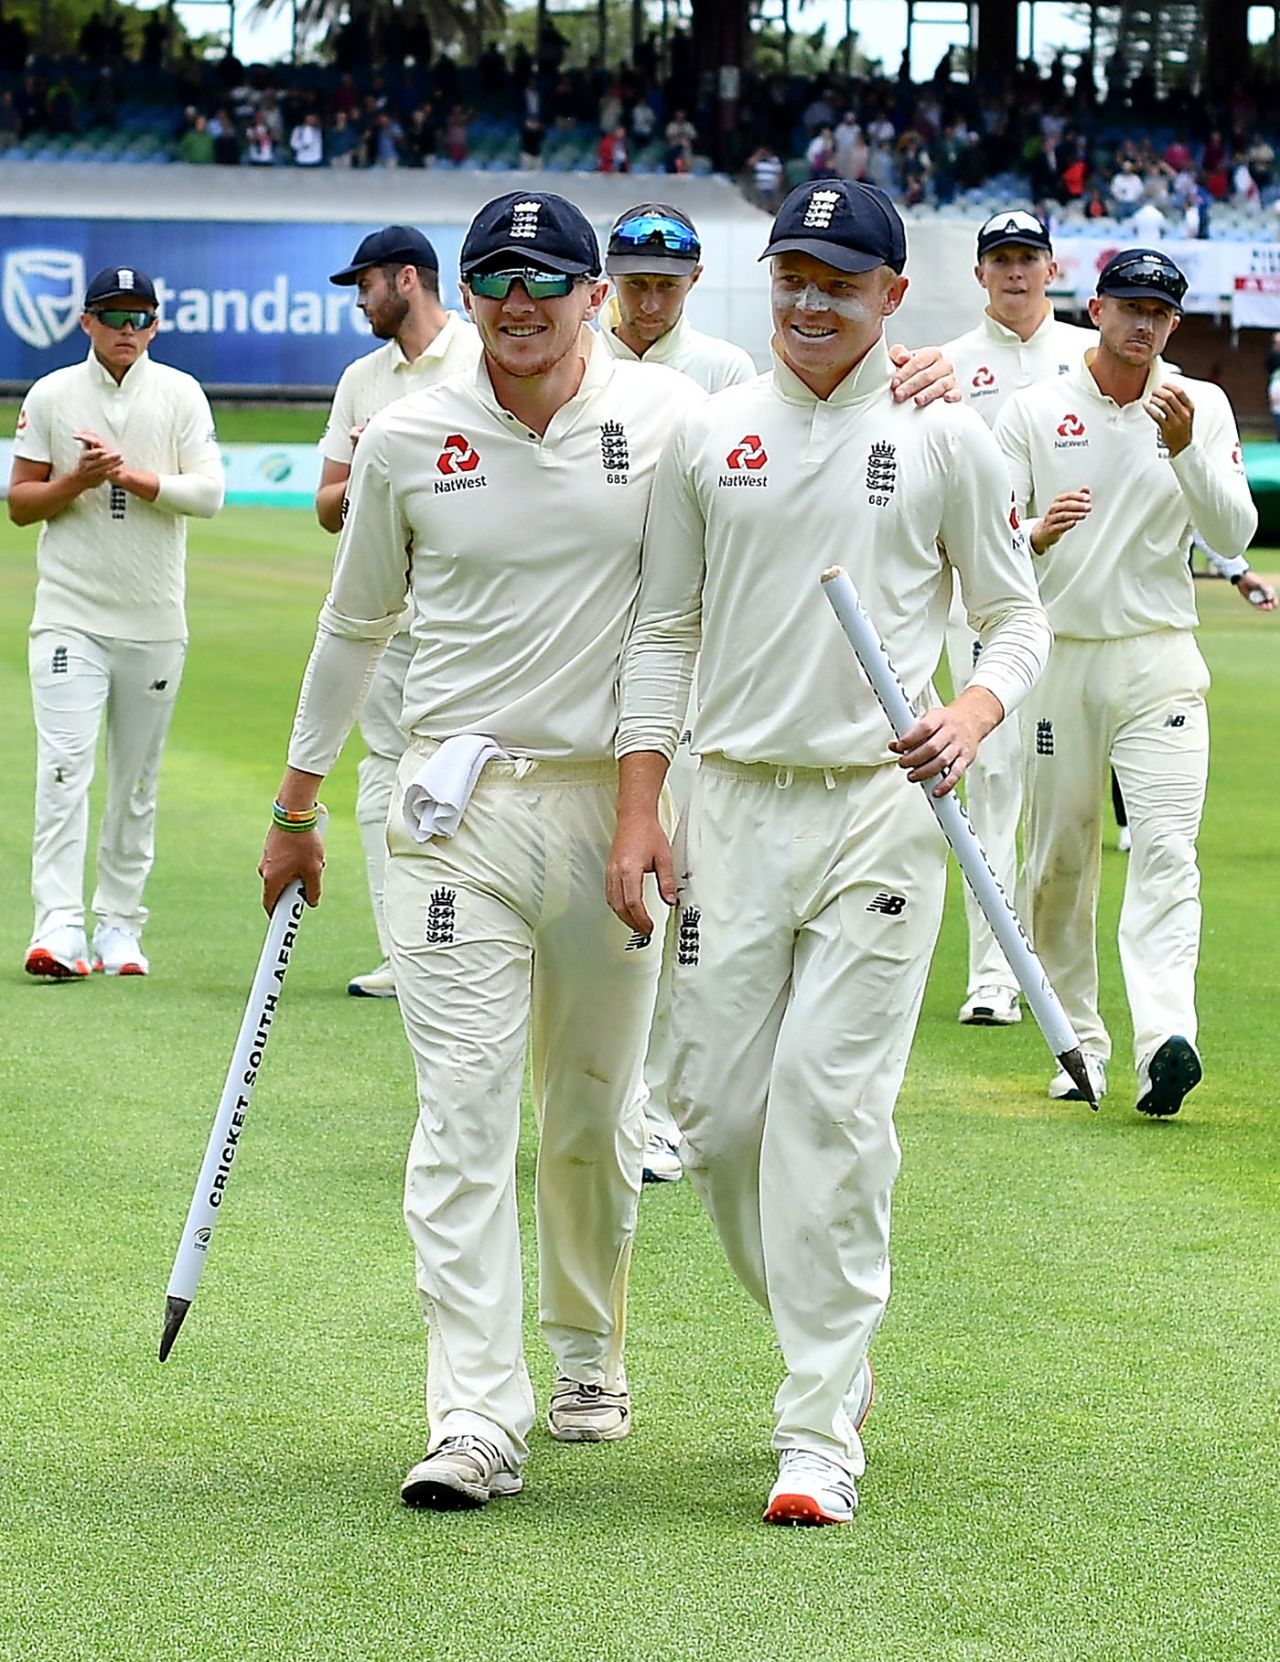 Dom Bess and Ollie Pope celebrate their success, South Africa v England, 3rd Test, 5th day, Port Elizabeth, January 20, 2020 